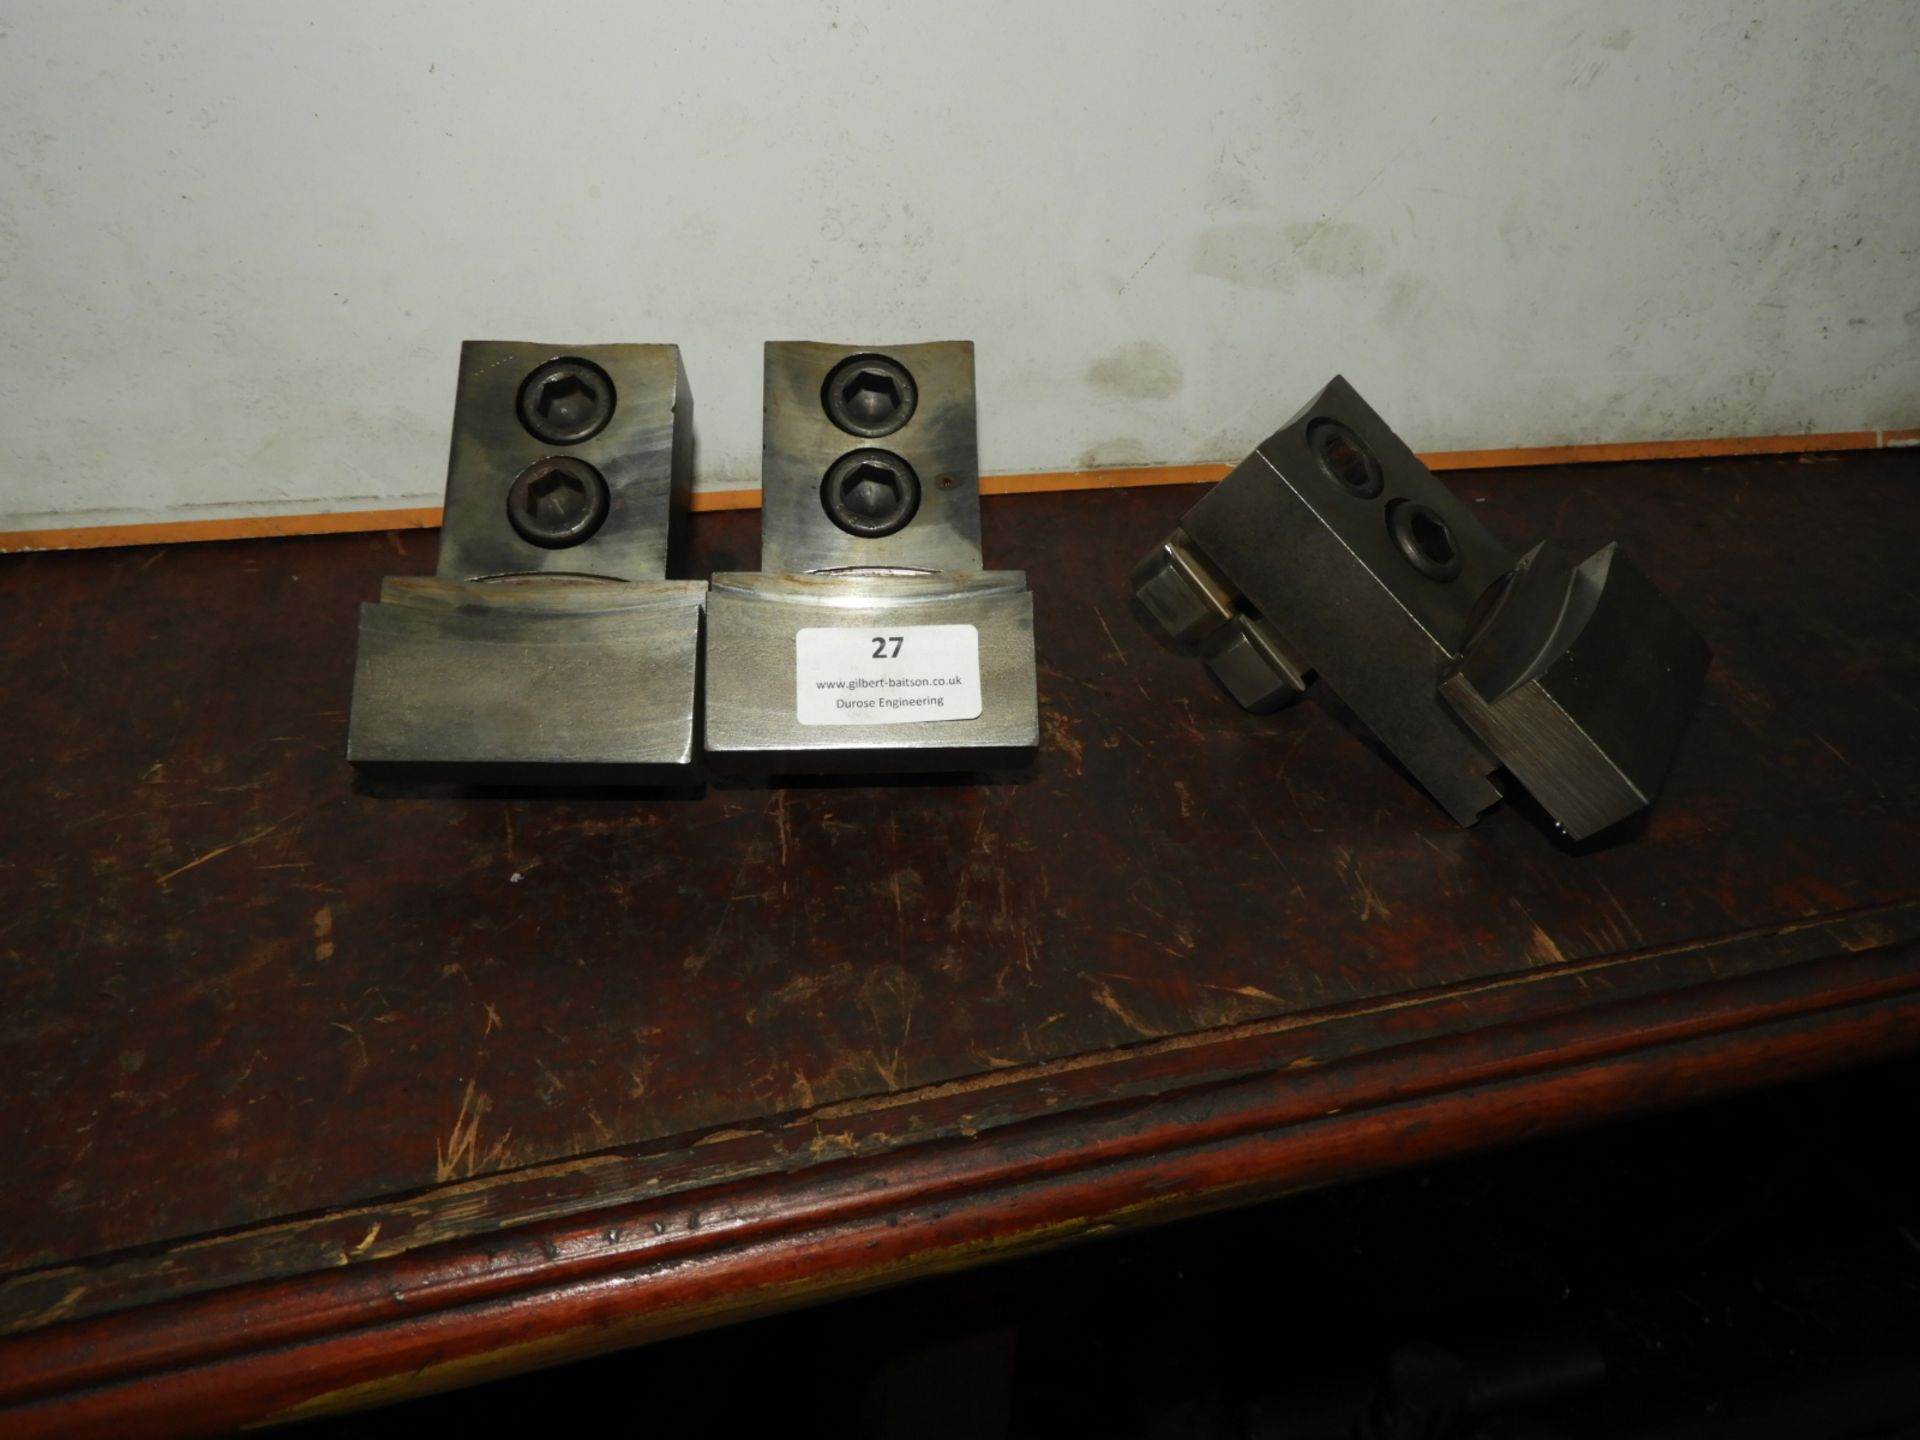 *Set of Three Chuck Jaws to Suit Colchester Tornado Lathe (as per photograph)